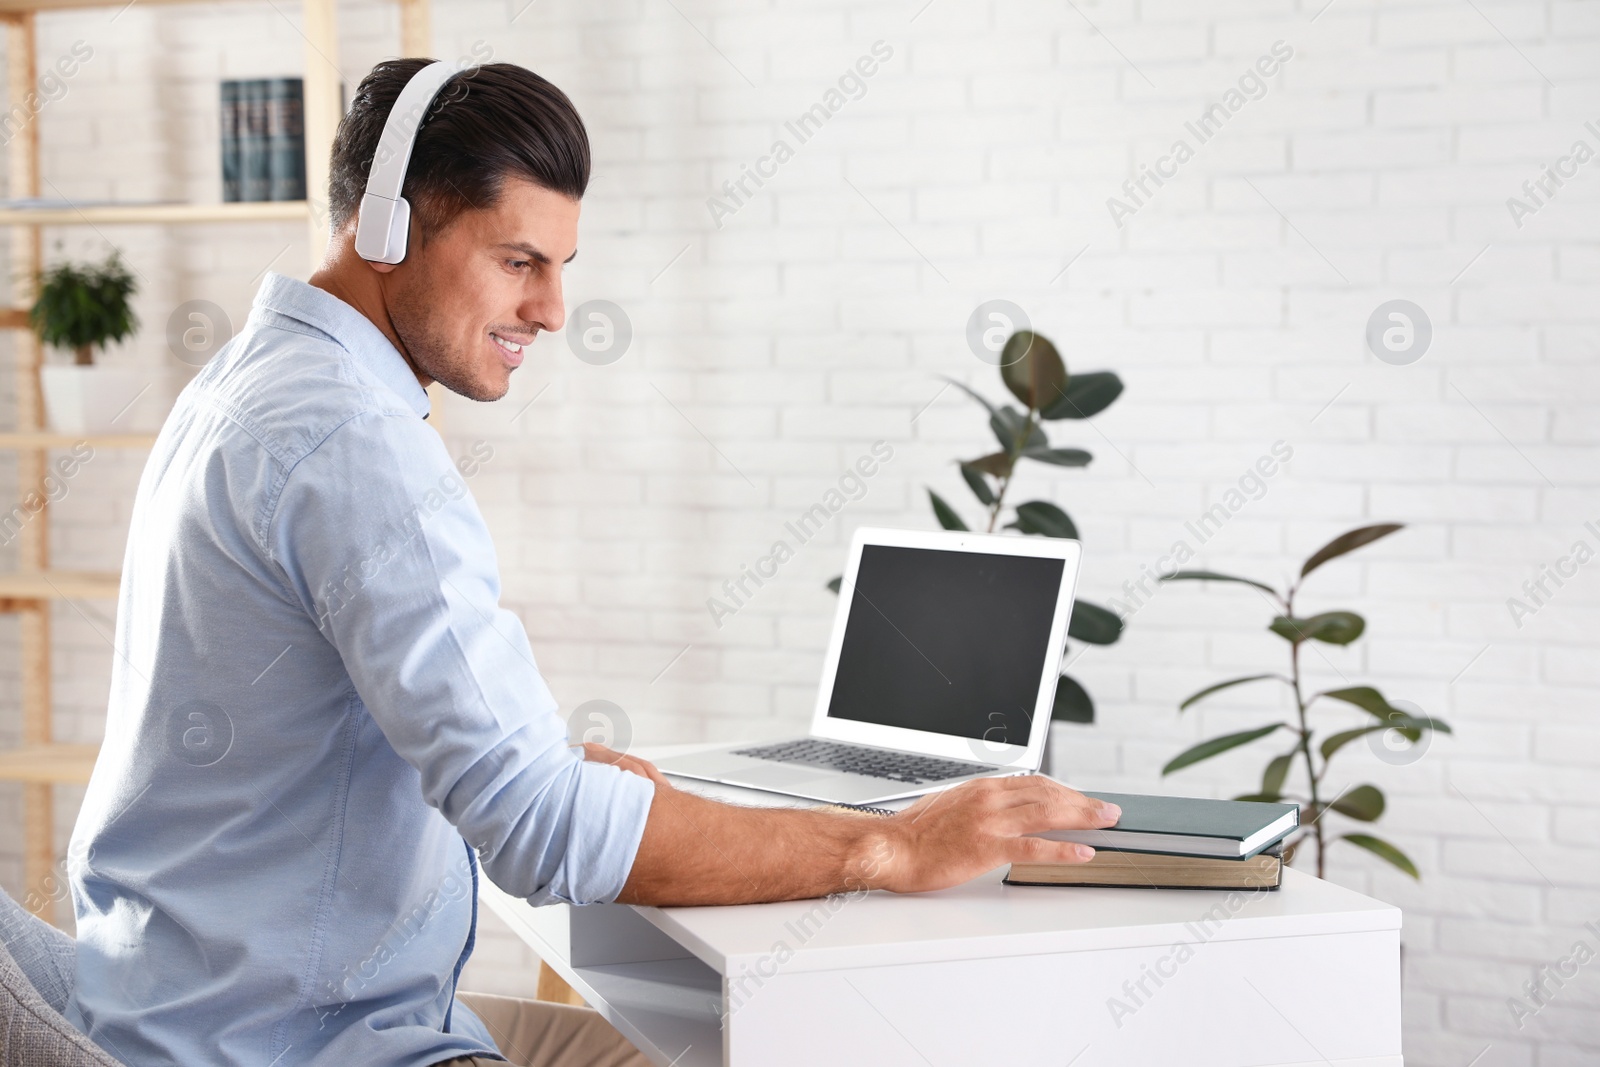 Photo of Man listening to audiobook at table with laptop